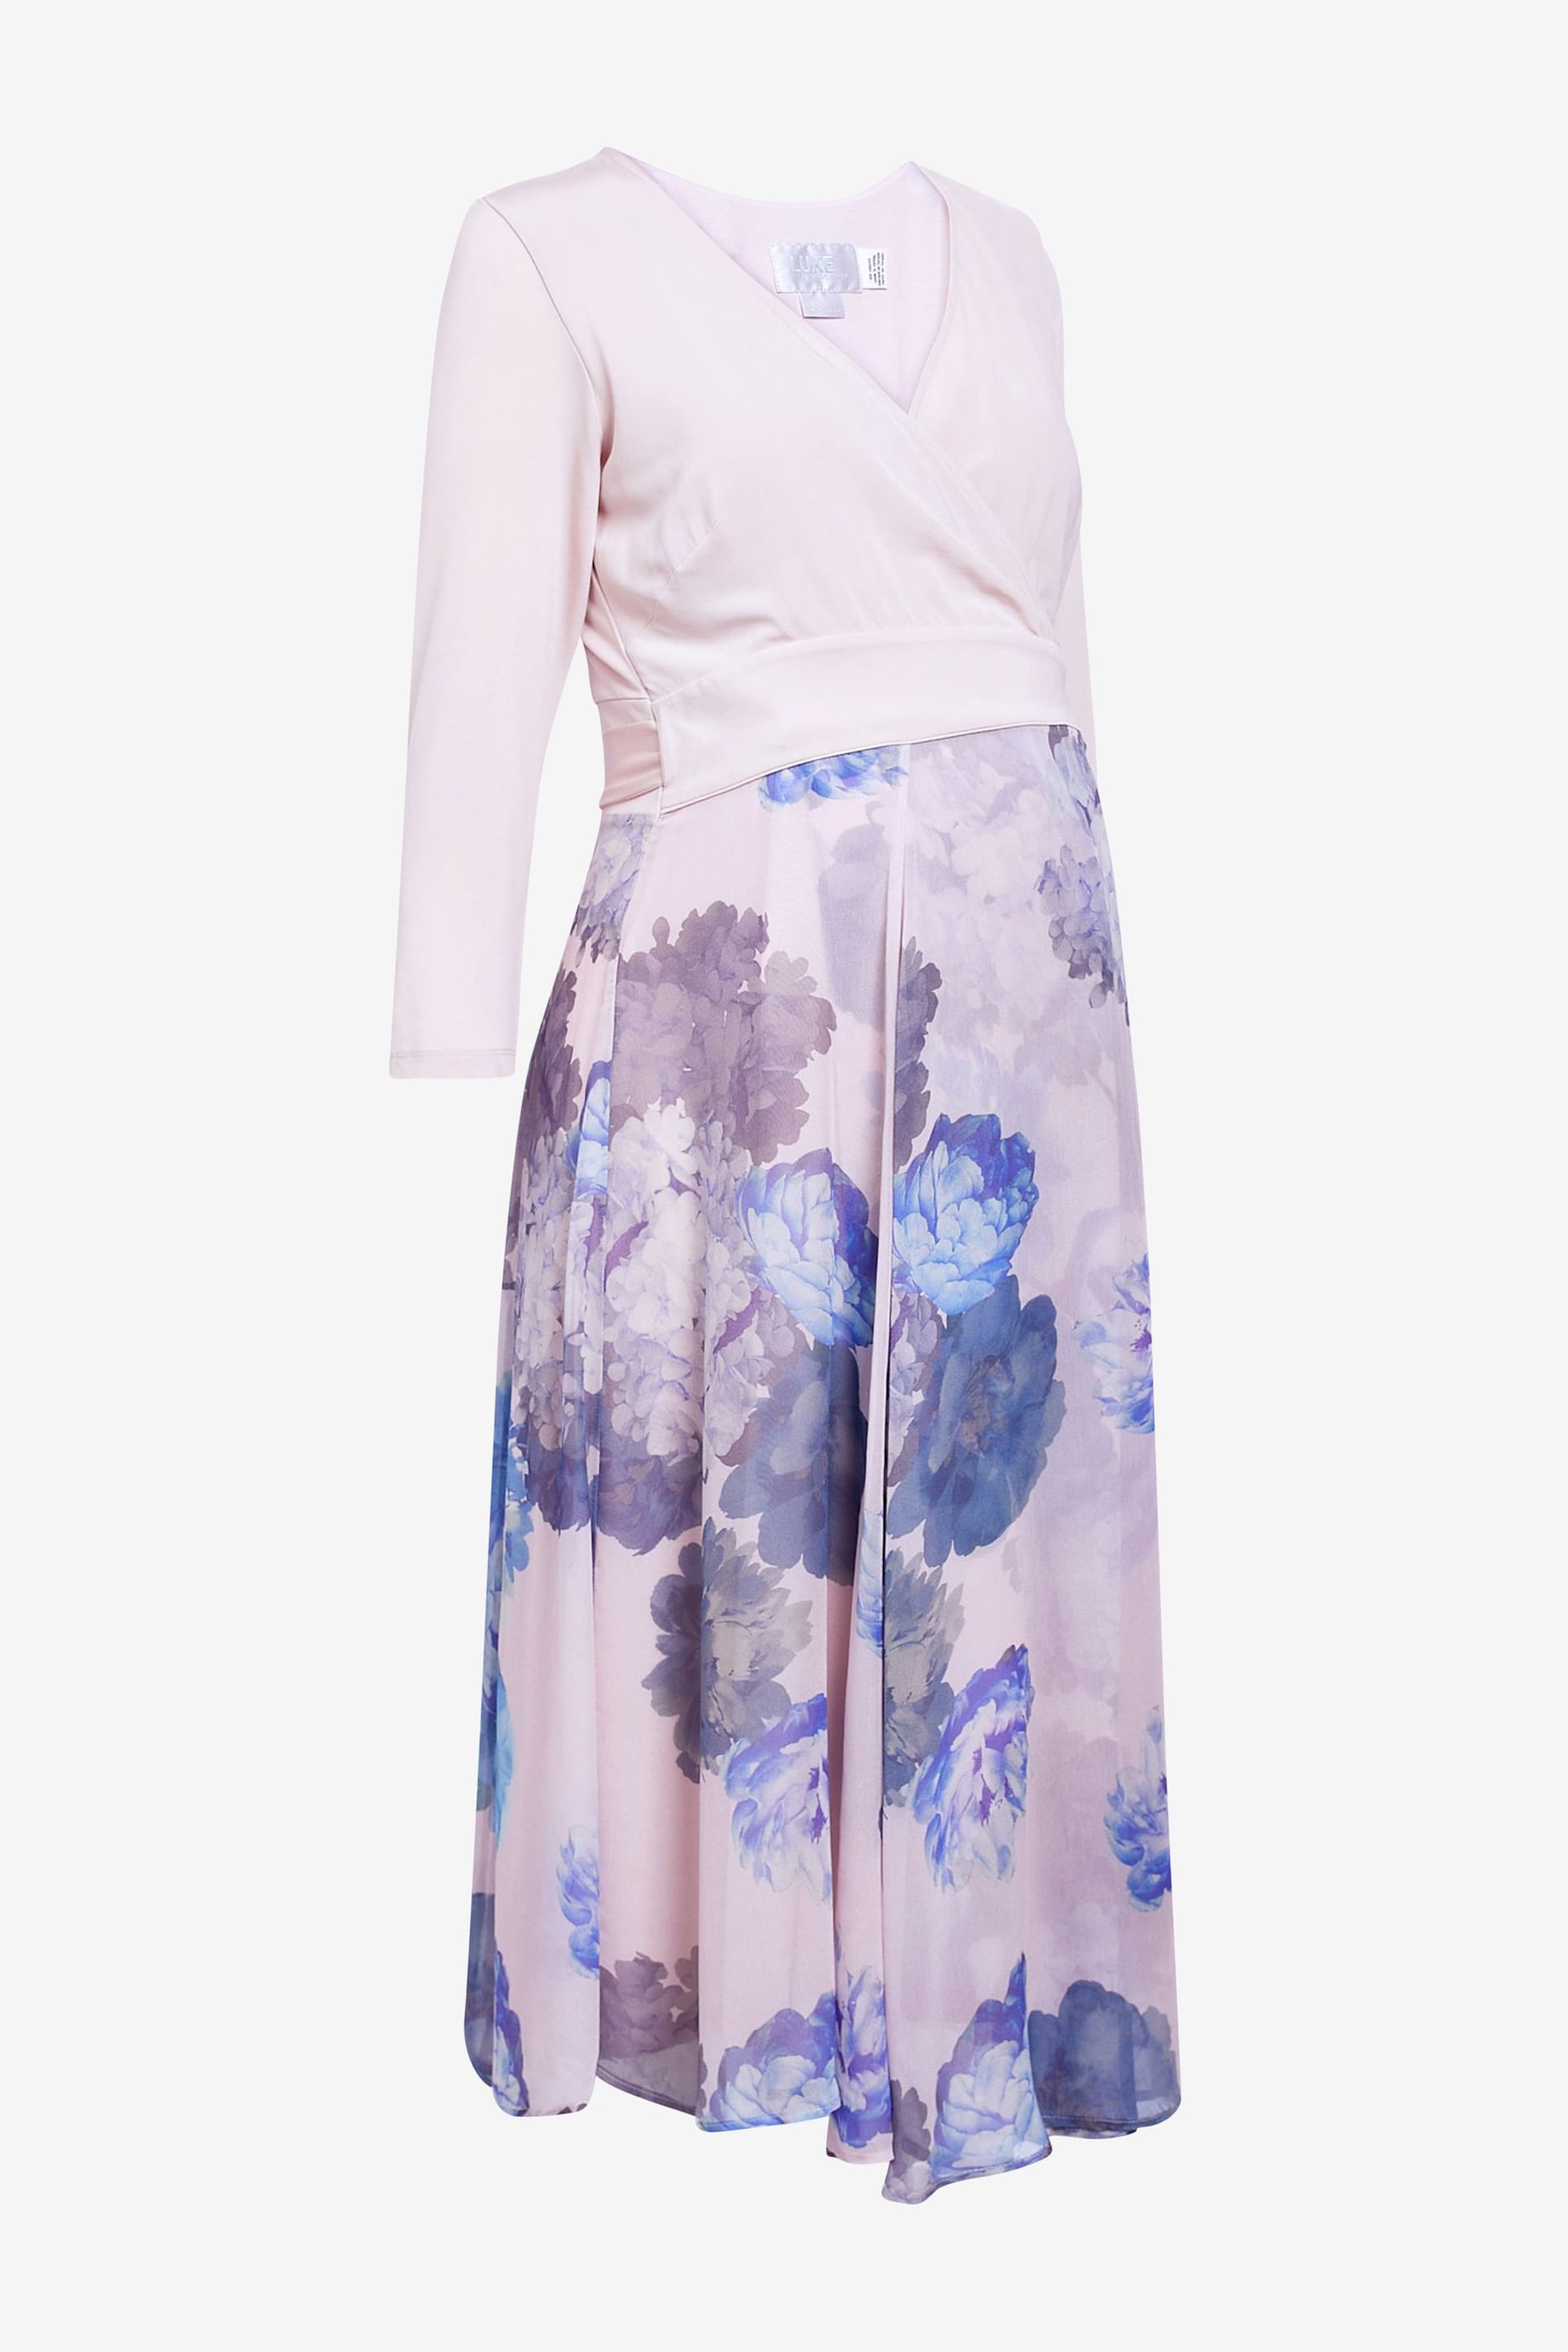 Seraphine Pink Pastel Floral Wrap Maternity And Nursing Midi Dress - Image 5 of 5